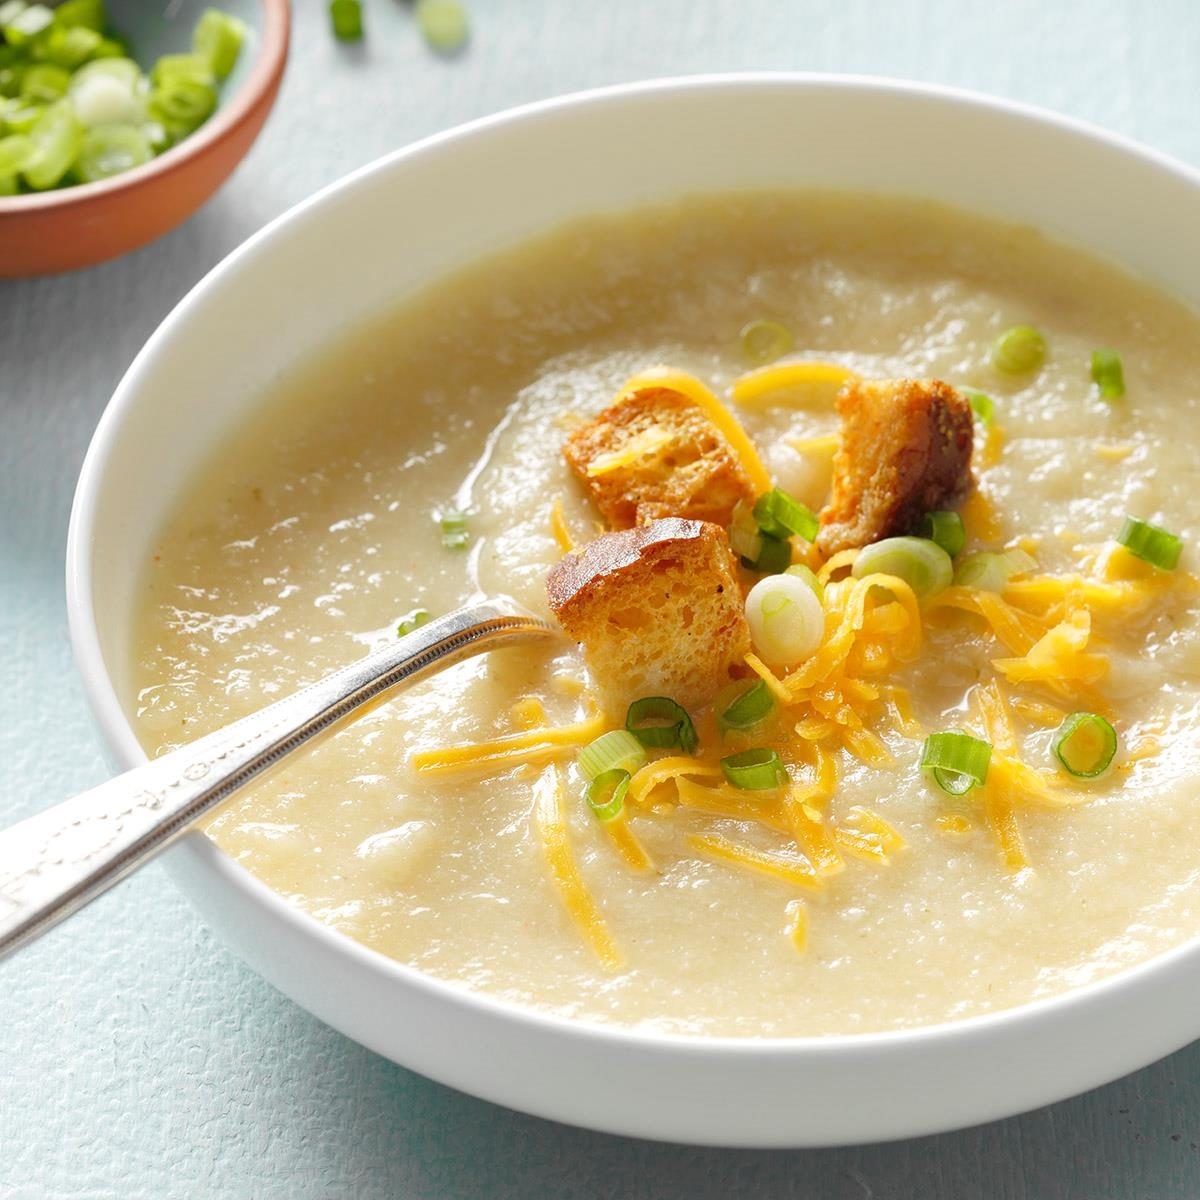 favourite slow cooker recipes - Slow cooker creamy cauliflower soup